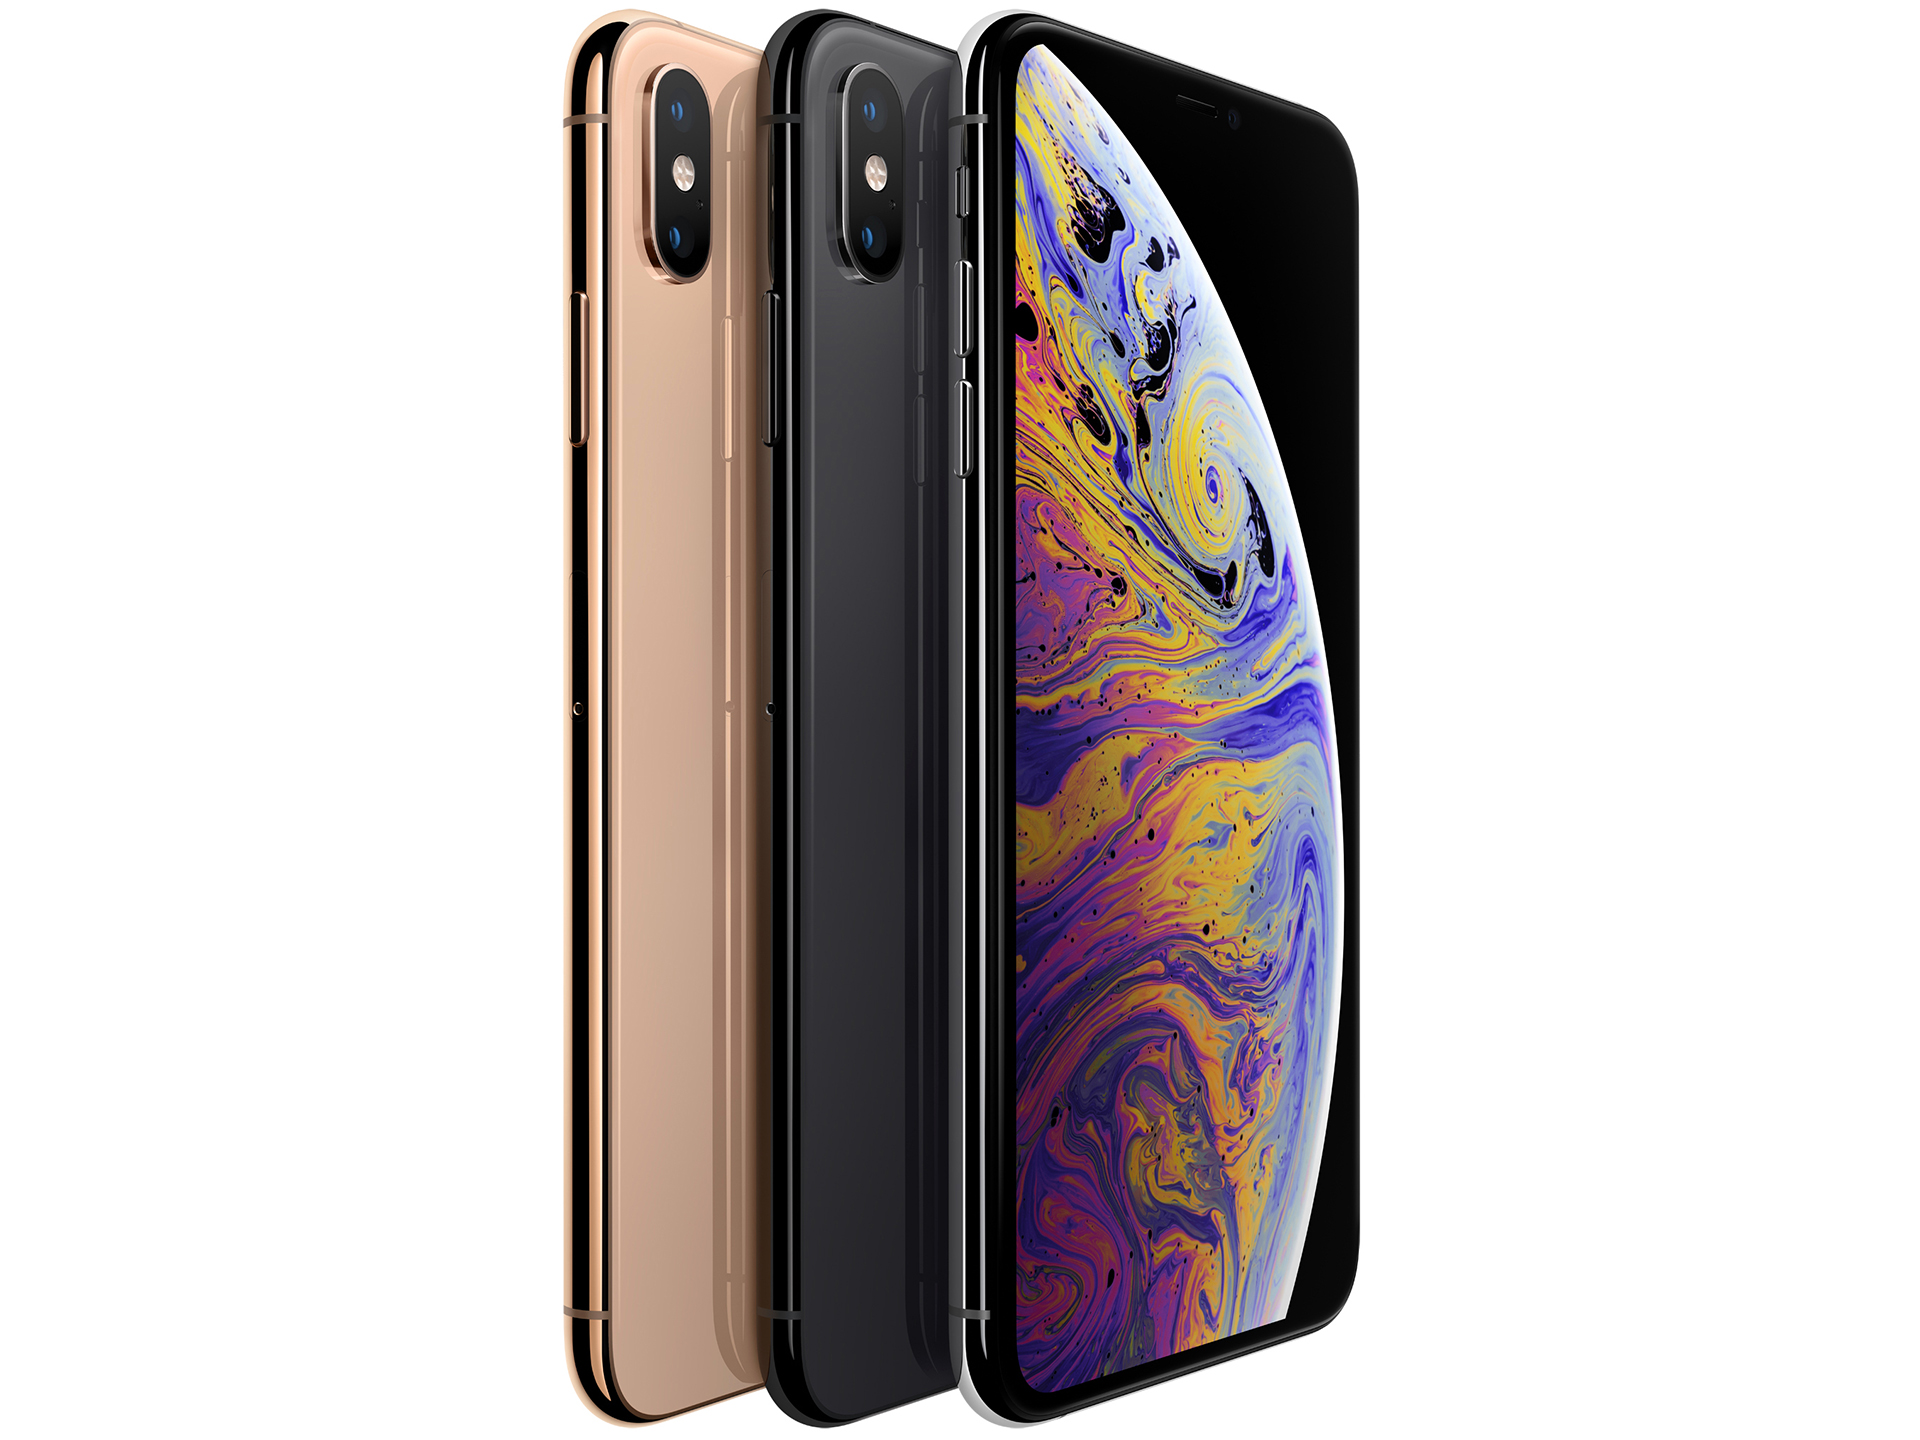 Iphone xs review